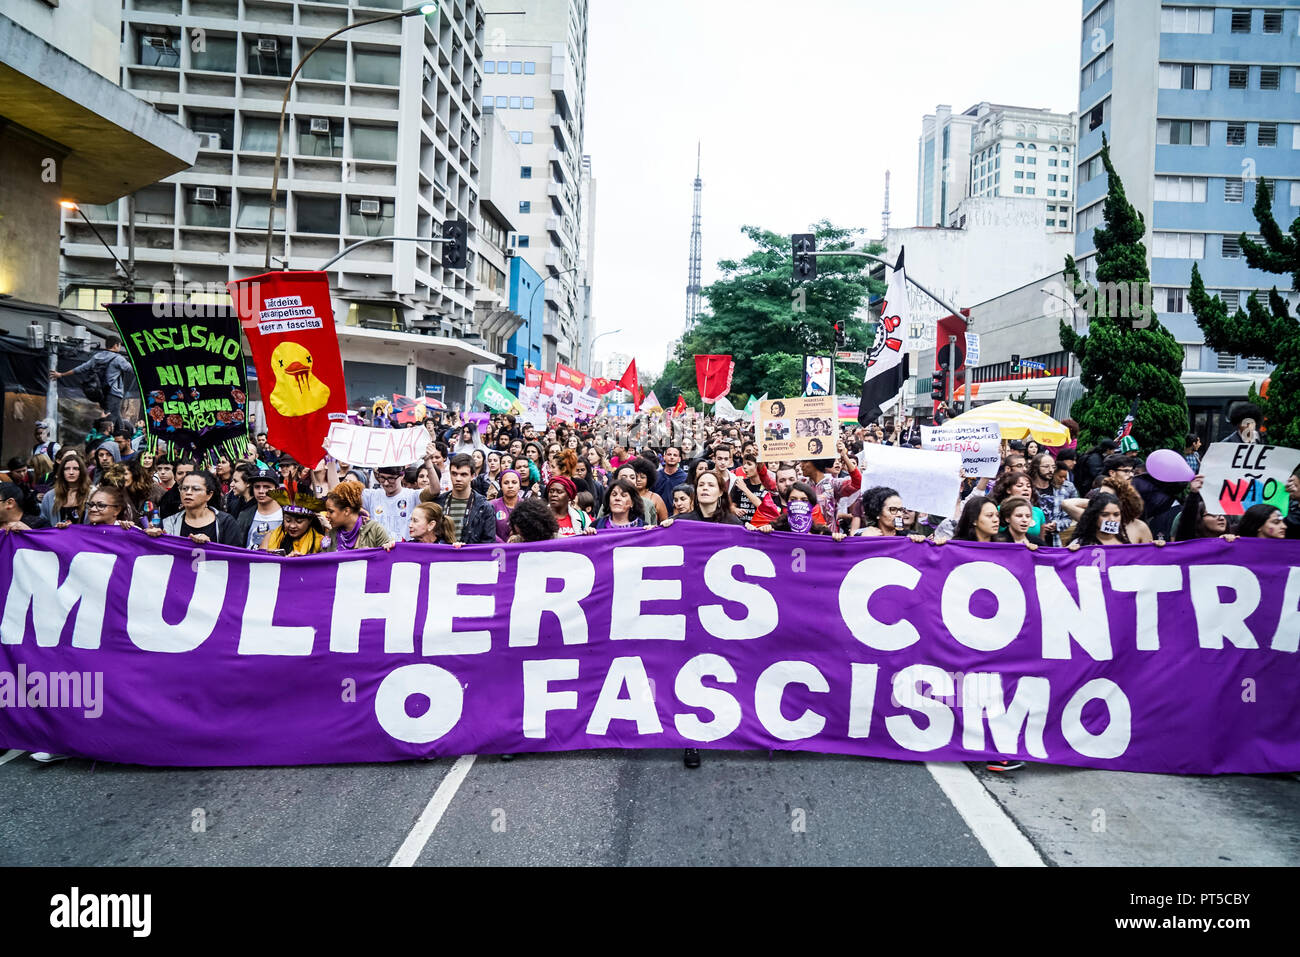 Sao Paulo, Brazil. 06th Oct, 2018. People holding a banner with the inscription 'Mulheres contra o fascismo' ('Women against Fascism') during a demonstration against the extreme right presidential candidate Bolsonaro. Many people in Sao Paulo took to the streets against Bolsonaro and his racist, anti-woman and anti-gay course. In the midst of a severe crisis, Latin America's largest country elects a new president. On 07.10.2018 the ultra-right Bolsonaro and the left Haddad will be the favourites in the presidential elections. Credit: Pablo Albarenga/dpa/Alamy Live News Stock Photo